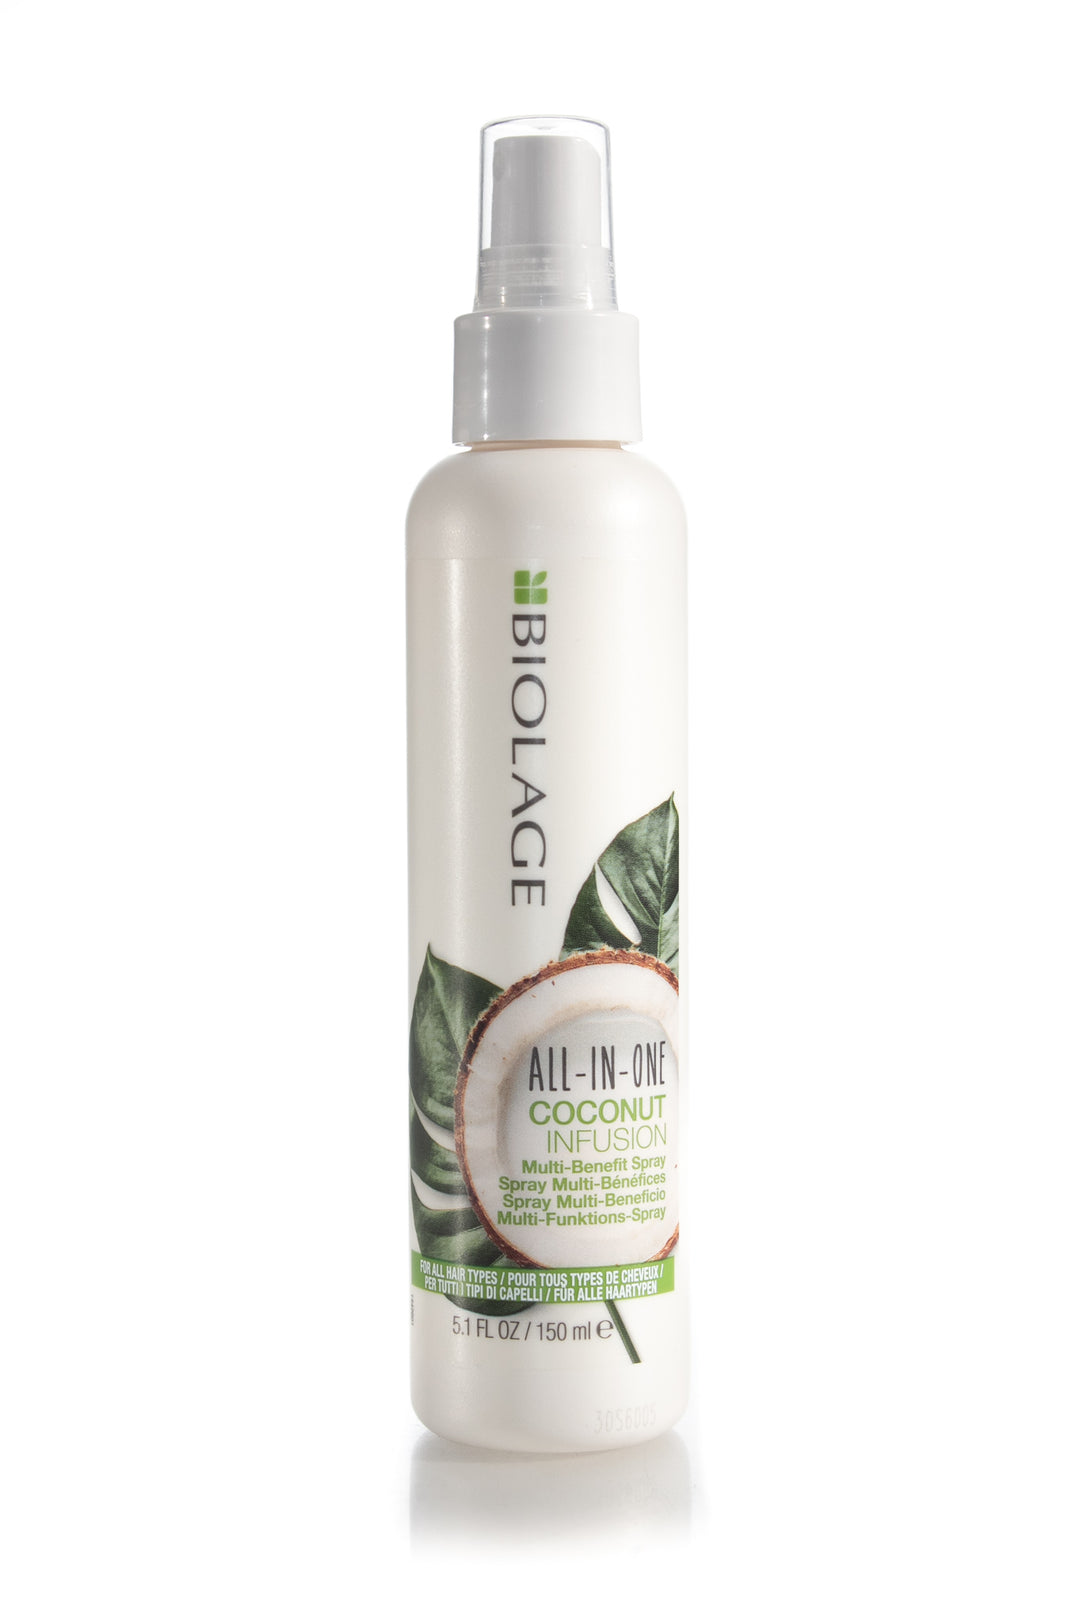 matrix-biolage-all-in-one-coconut-infusion-spray-150ml